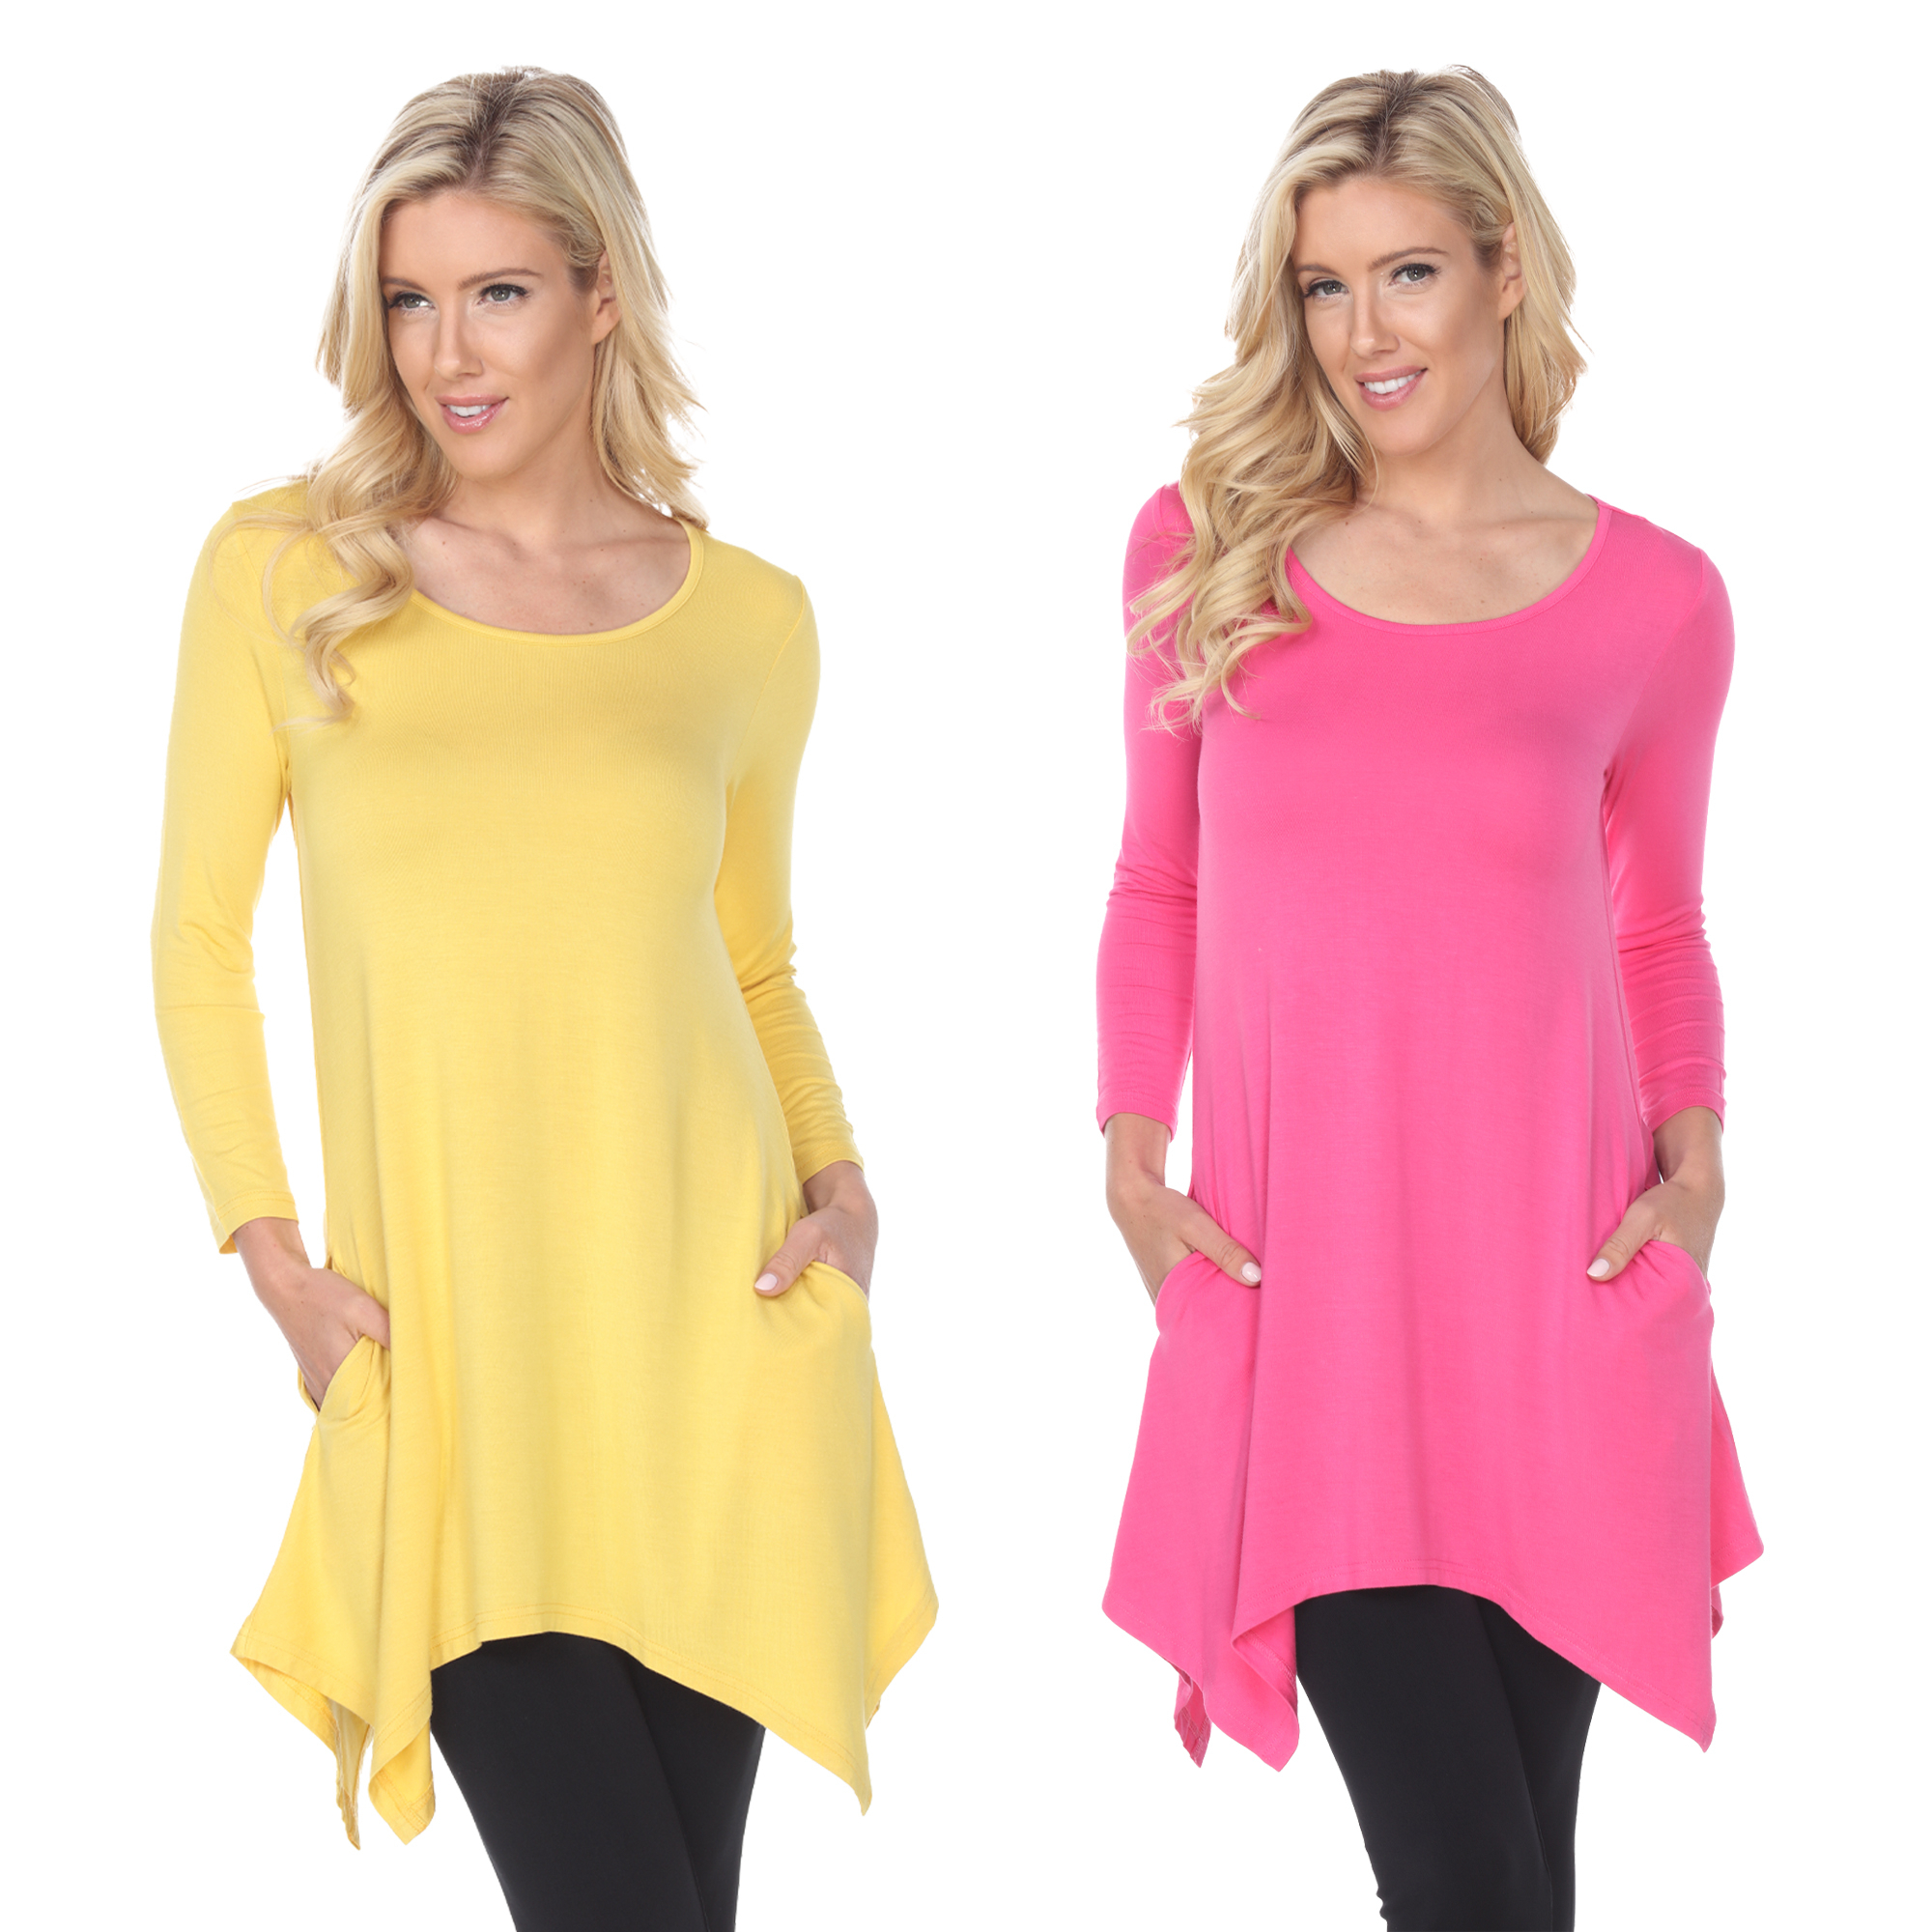 White Mark Women's Pack Of 2 Yellow Tunic Top - Yellow, Coral, 2X